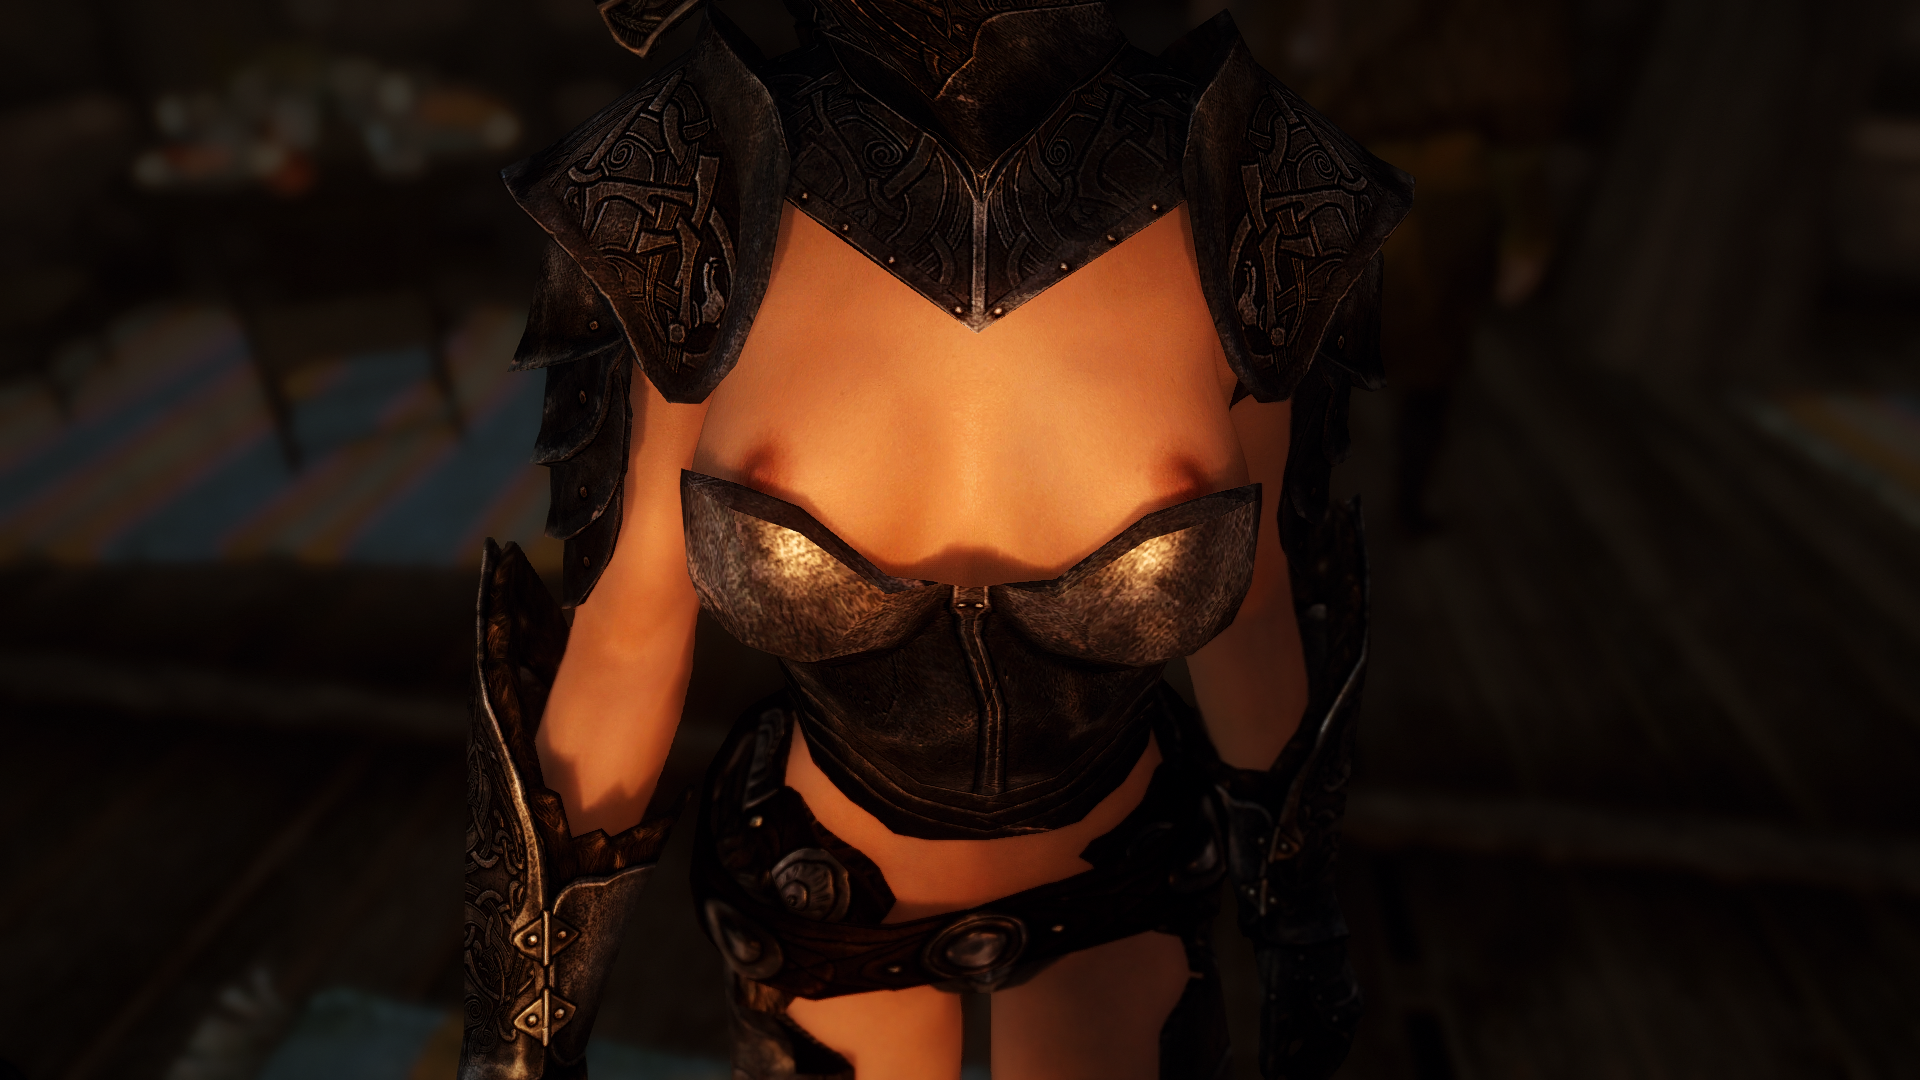 Nipples showing with armor on Skyrim Technical Support LoversLab. www.lover...